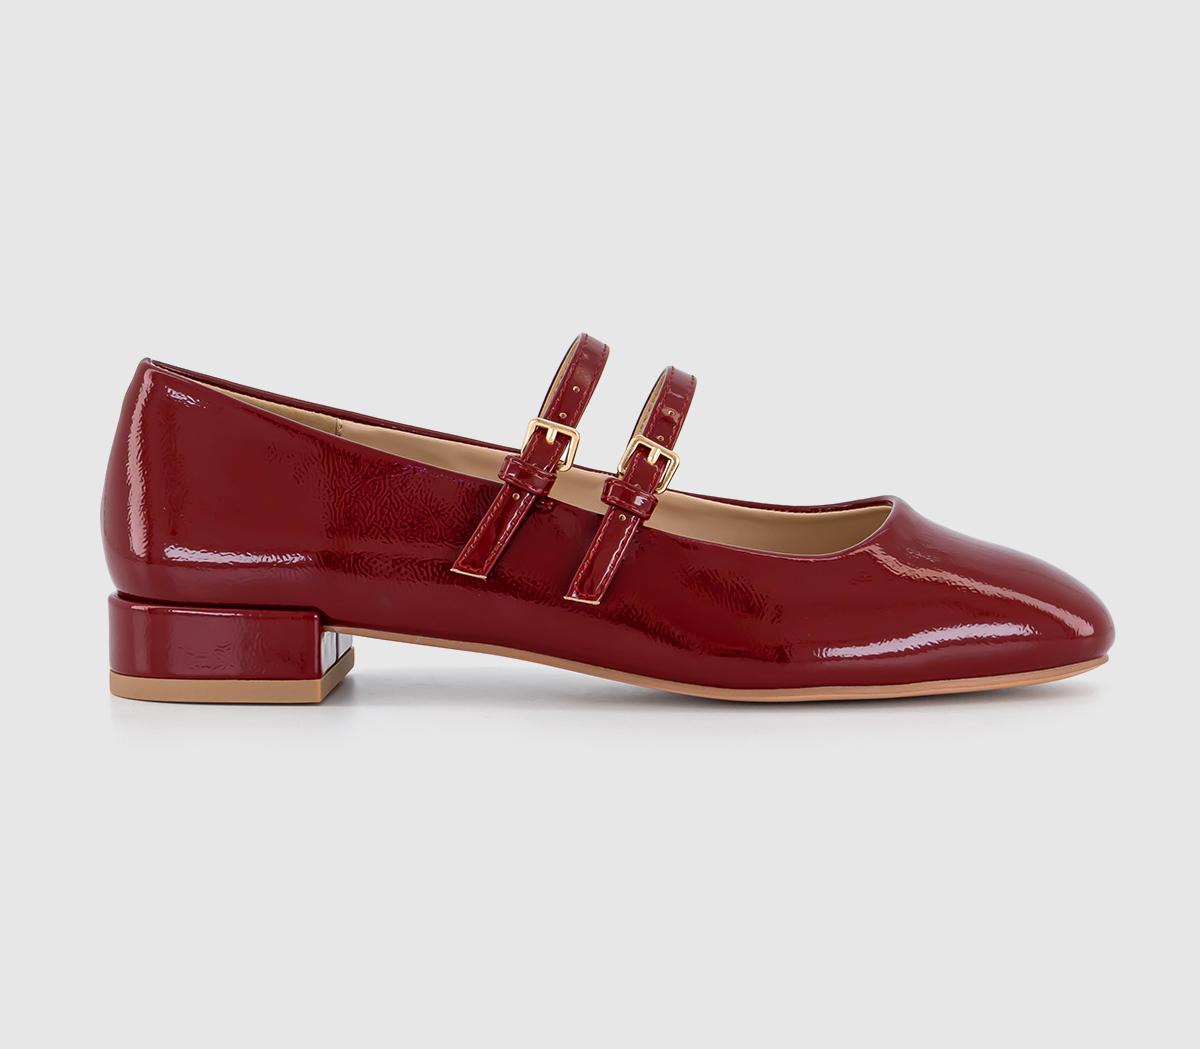 OFFICEFrances Two Strap Mary JanesRed Patent